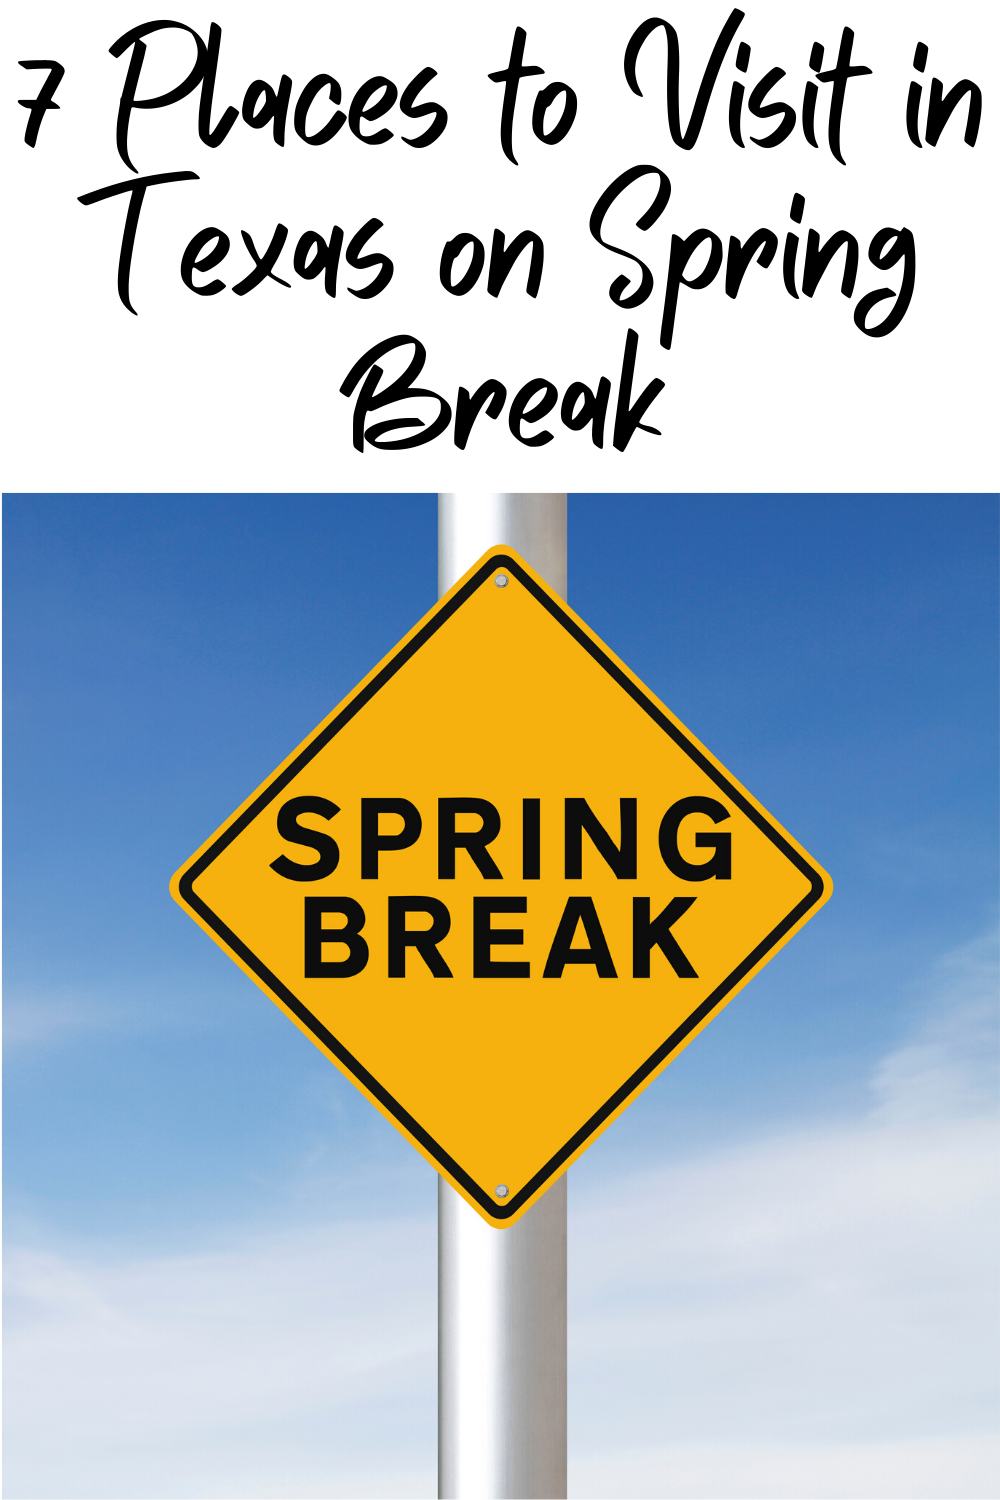 Houston living is great, especially when it comes to spring break in Houston. There's always something fun and exciting to do. These are 7 places to visit in Texas on spring break. If you need ideas or inspiration for your spring break this year, we've got you covered.